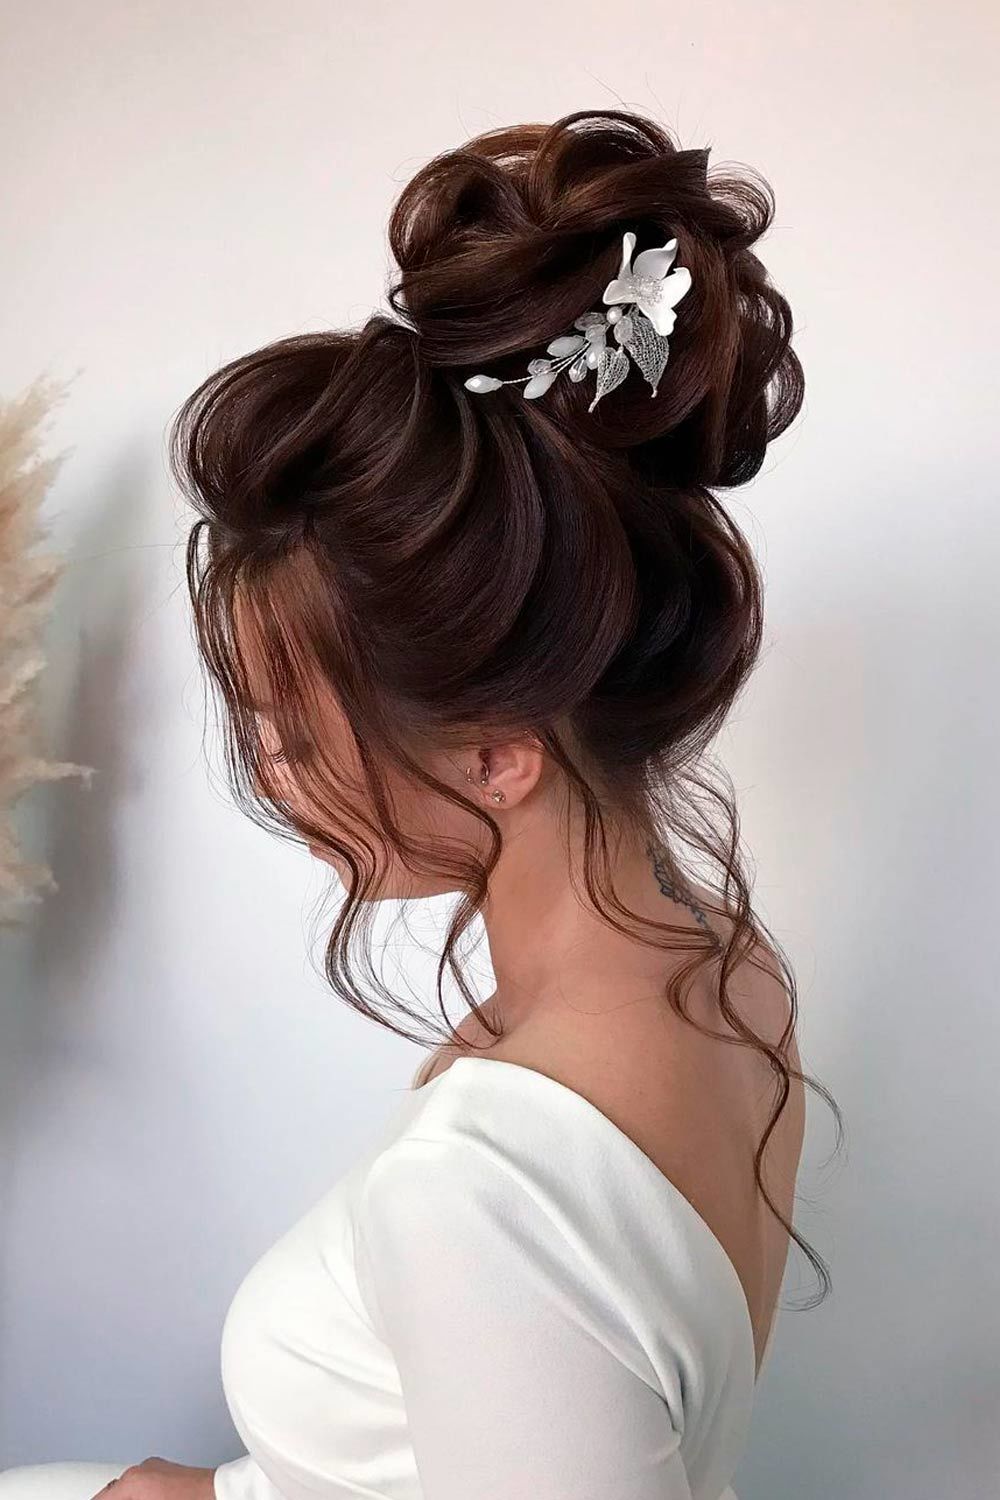 Hairstyles That Match Your Dress